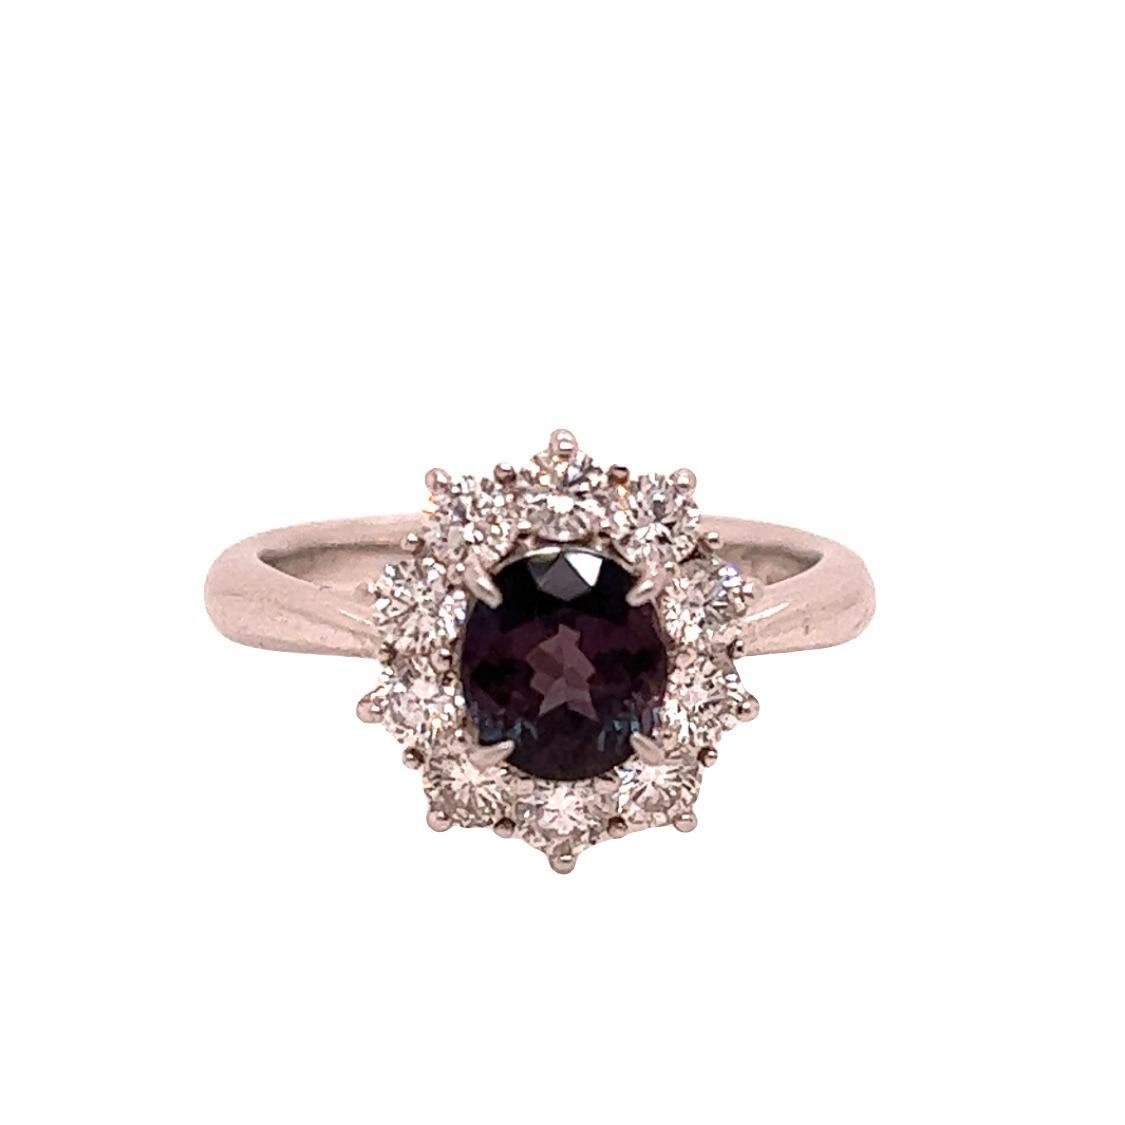 This is a gorgeous natural AAA quality oval Alexandrite surrounded by a dainty diamond halo that is set in a vintage platinum setting. This ring features a natural 1.36 oval alexandrite that is certified by the Gemological Institute of America (GIA)